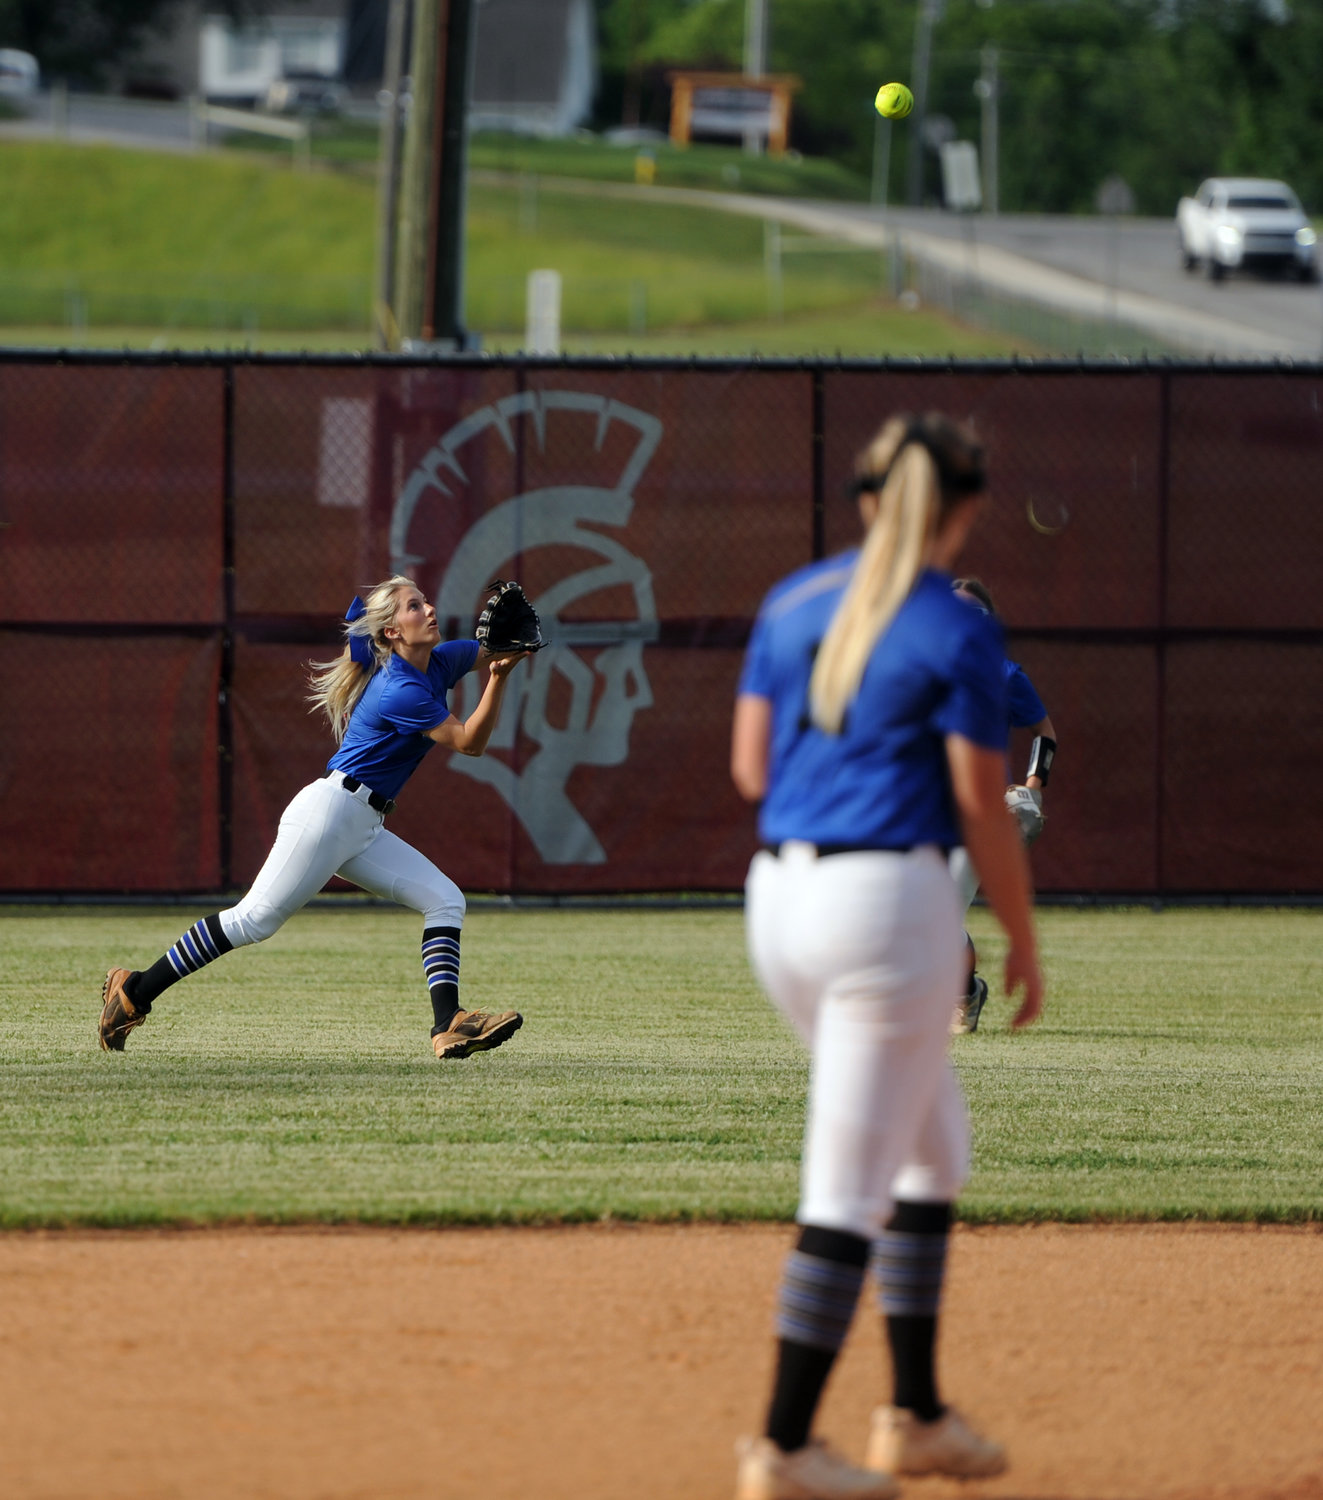 Tigerette center fielder Olivia Wooten dashes to record an out in the bottom of the third inning.